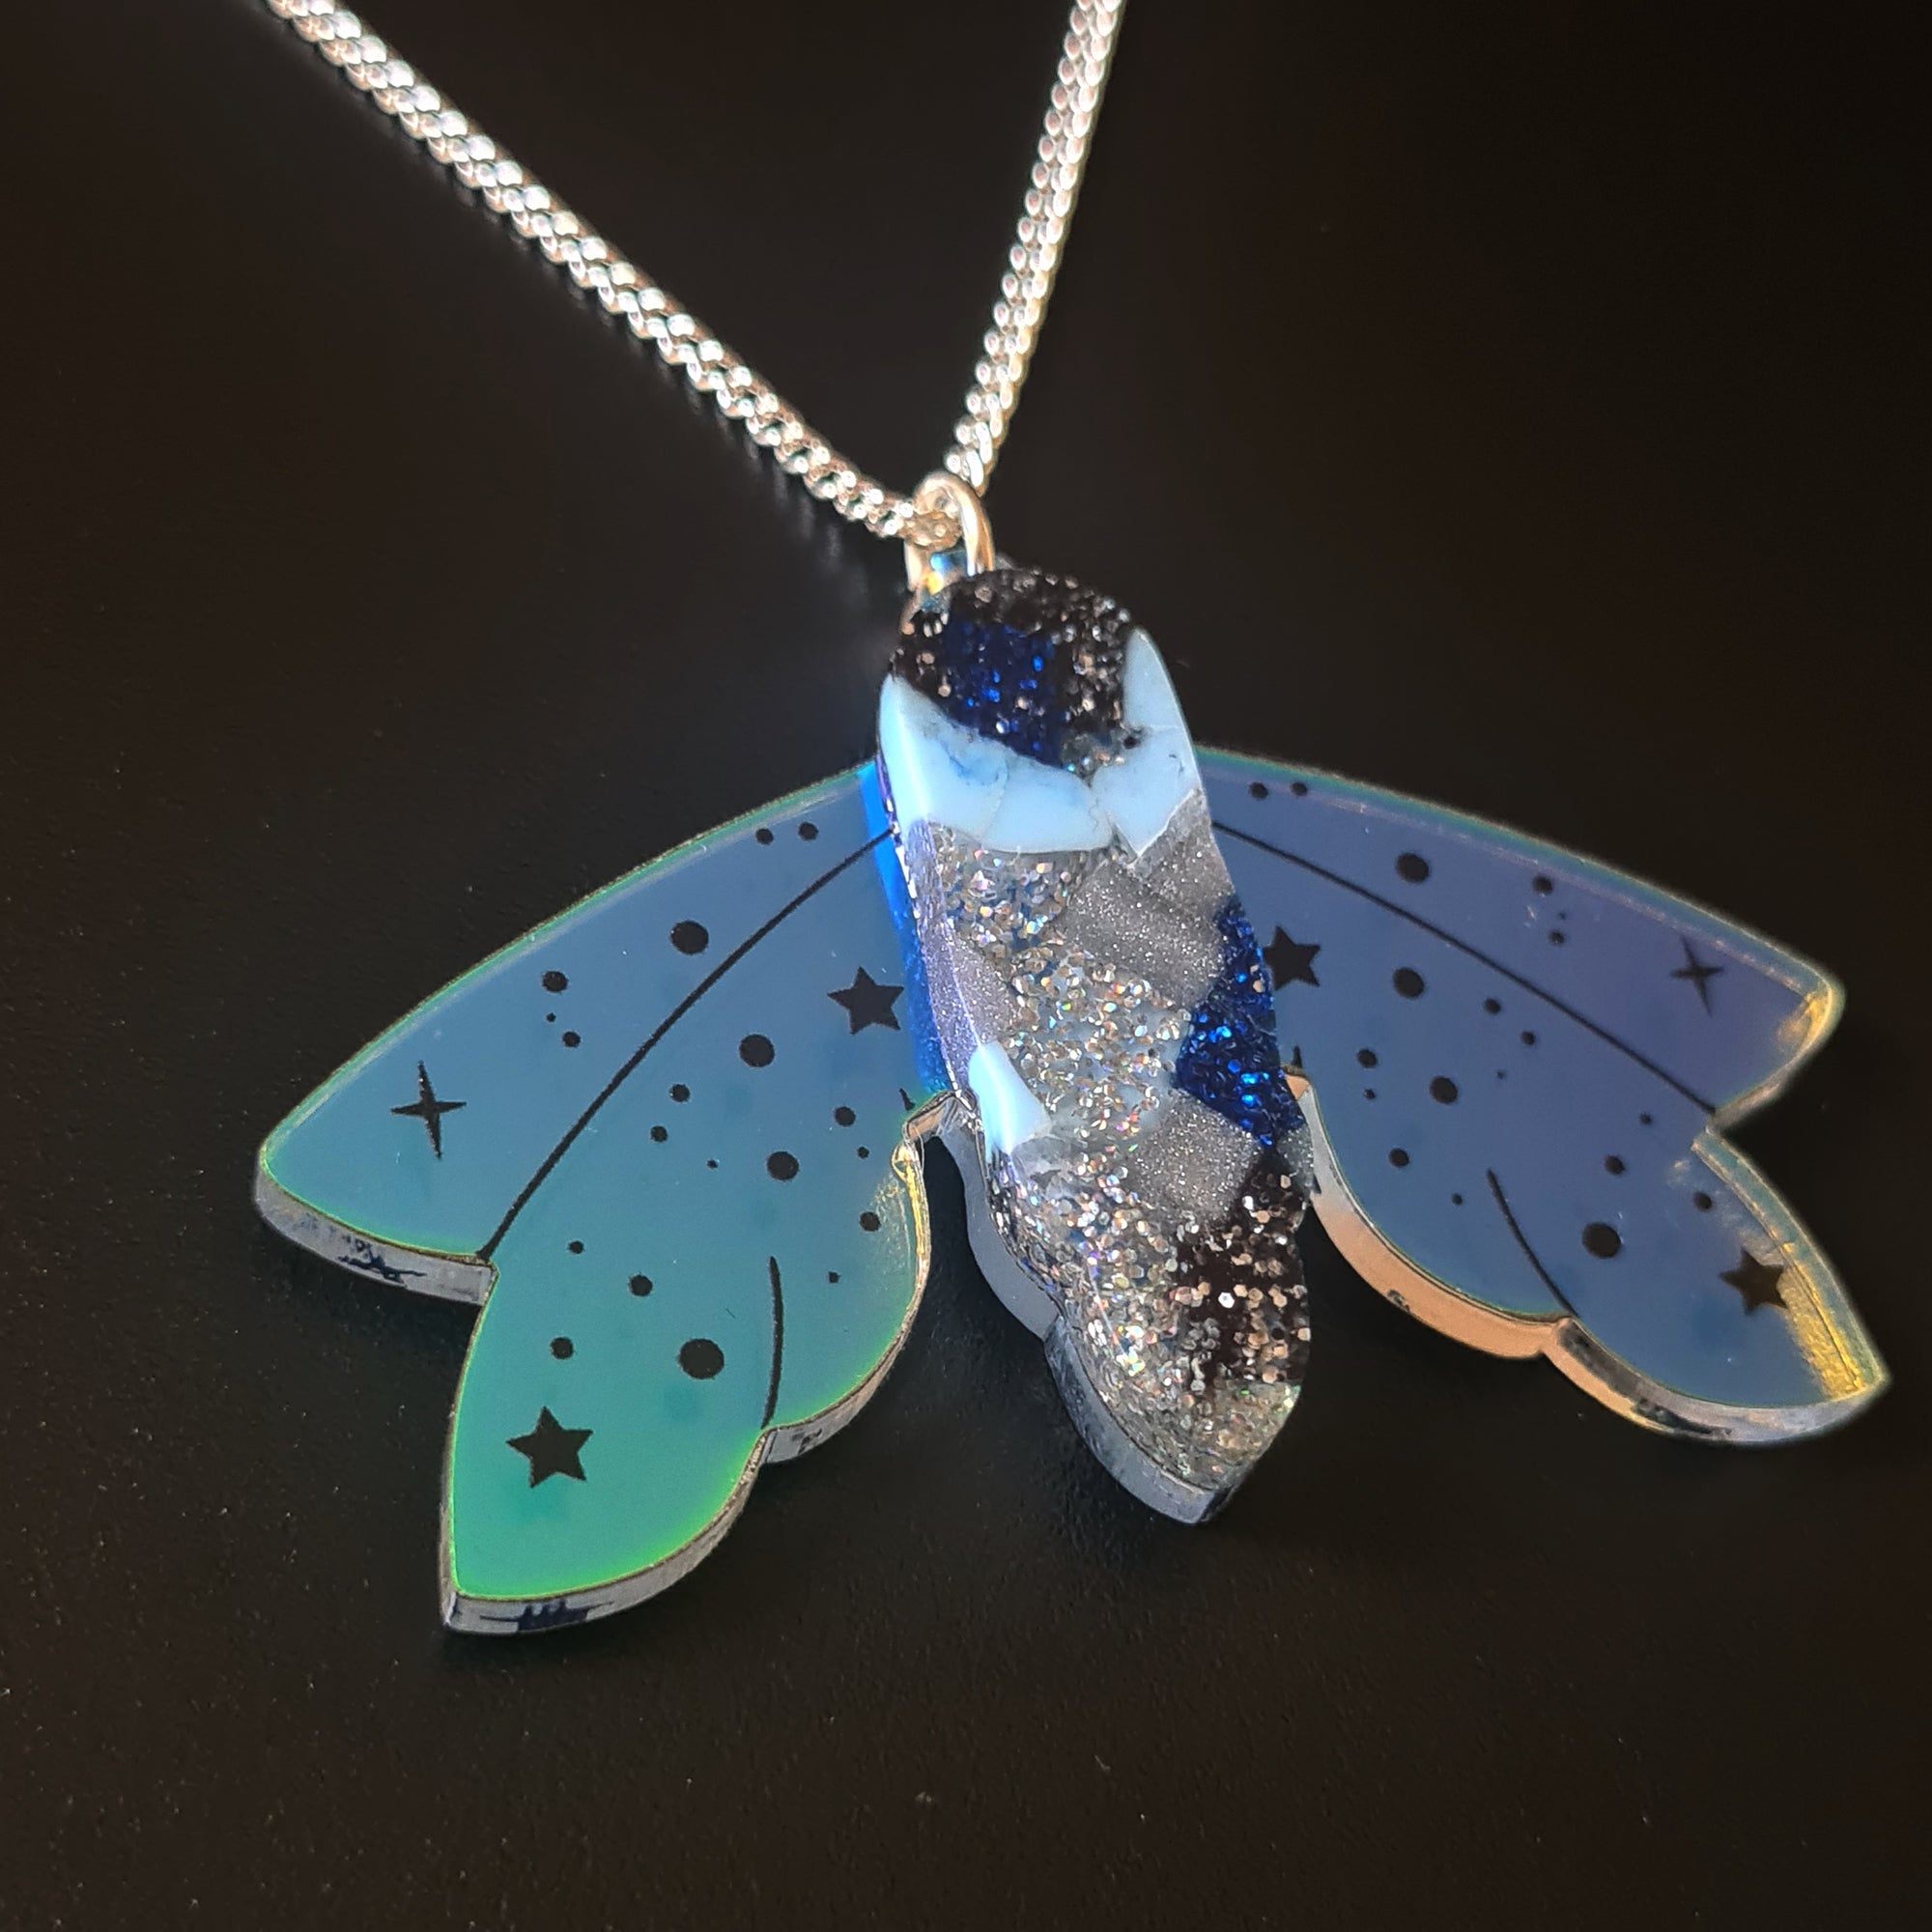 Recycled Acrylic Celestial Moth Necklace by Esoteric London (Blue/Black)